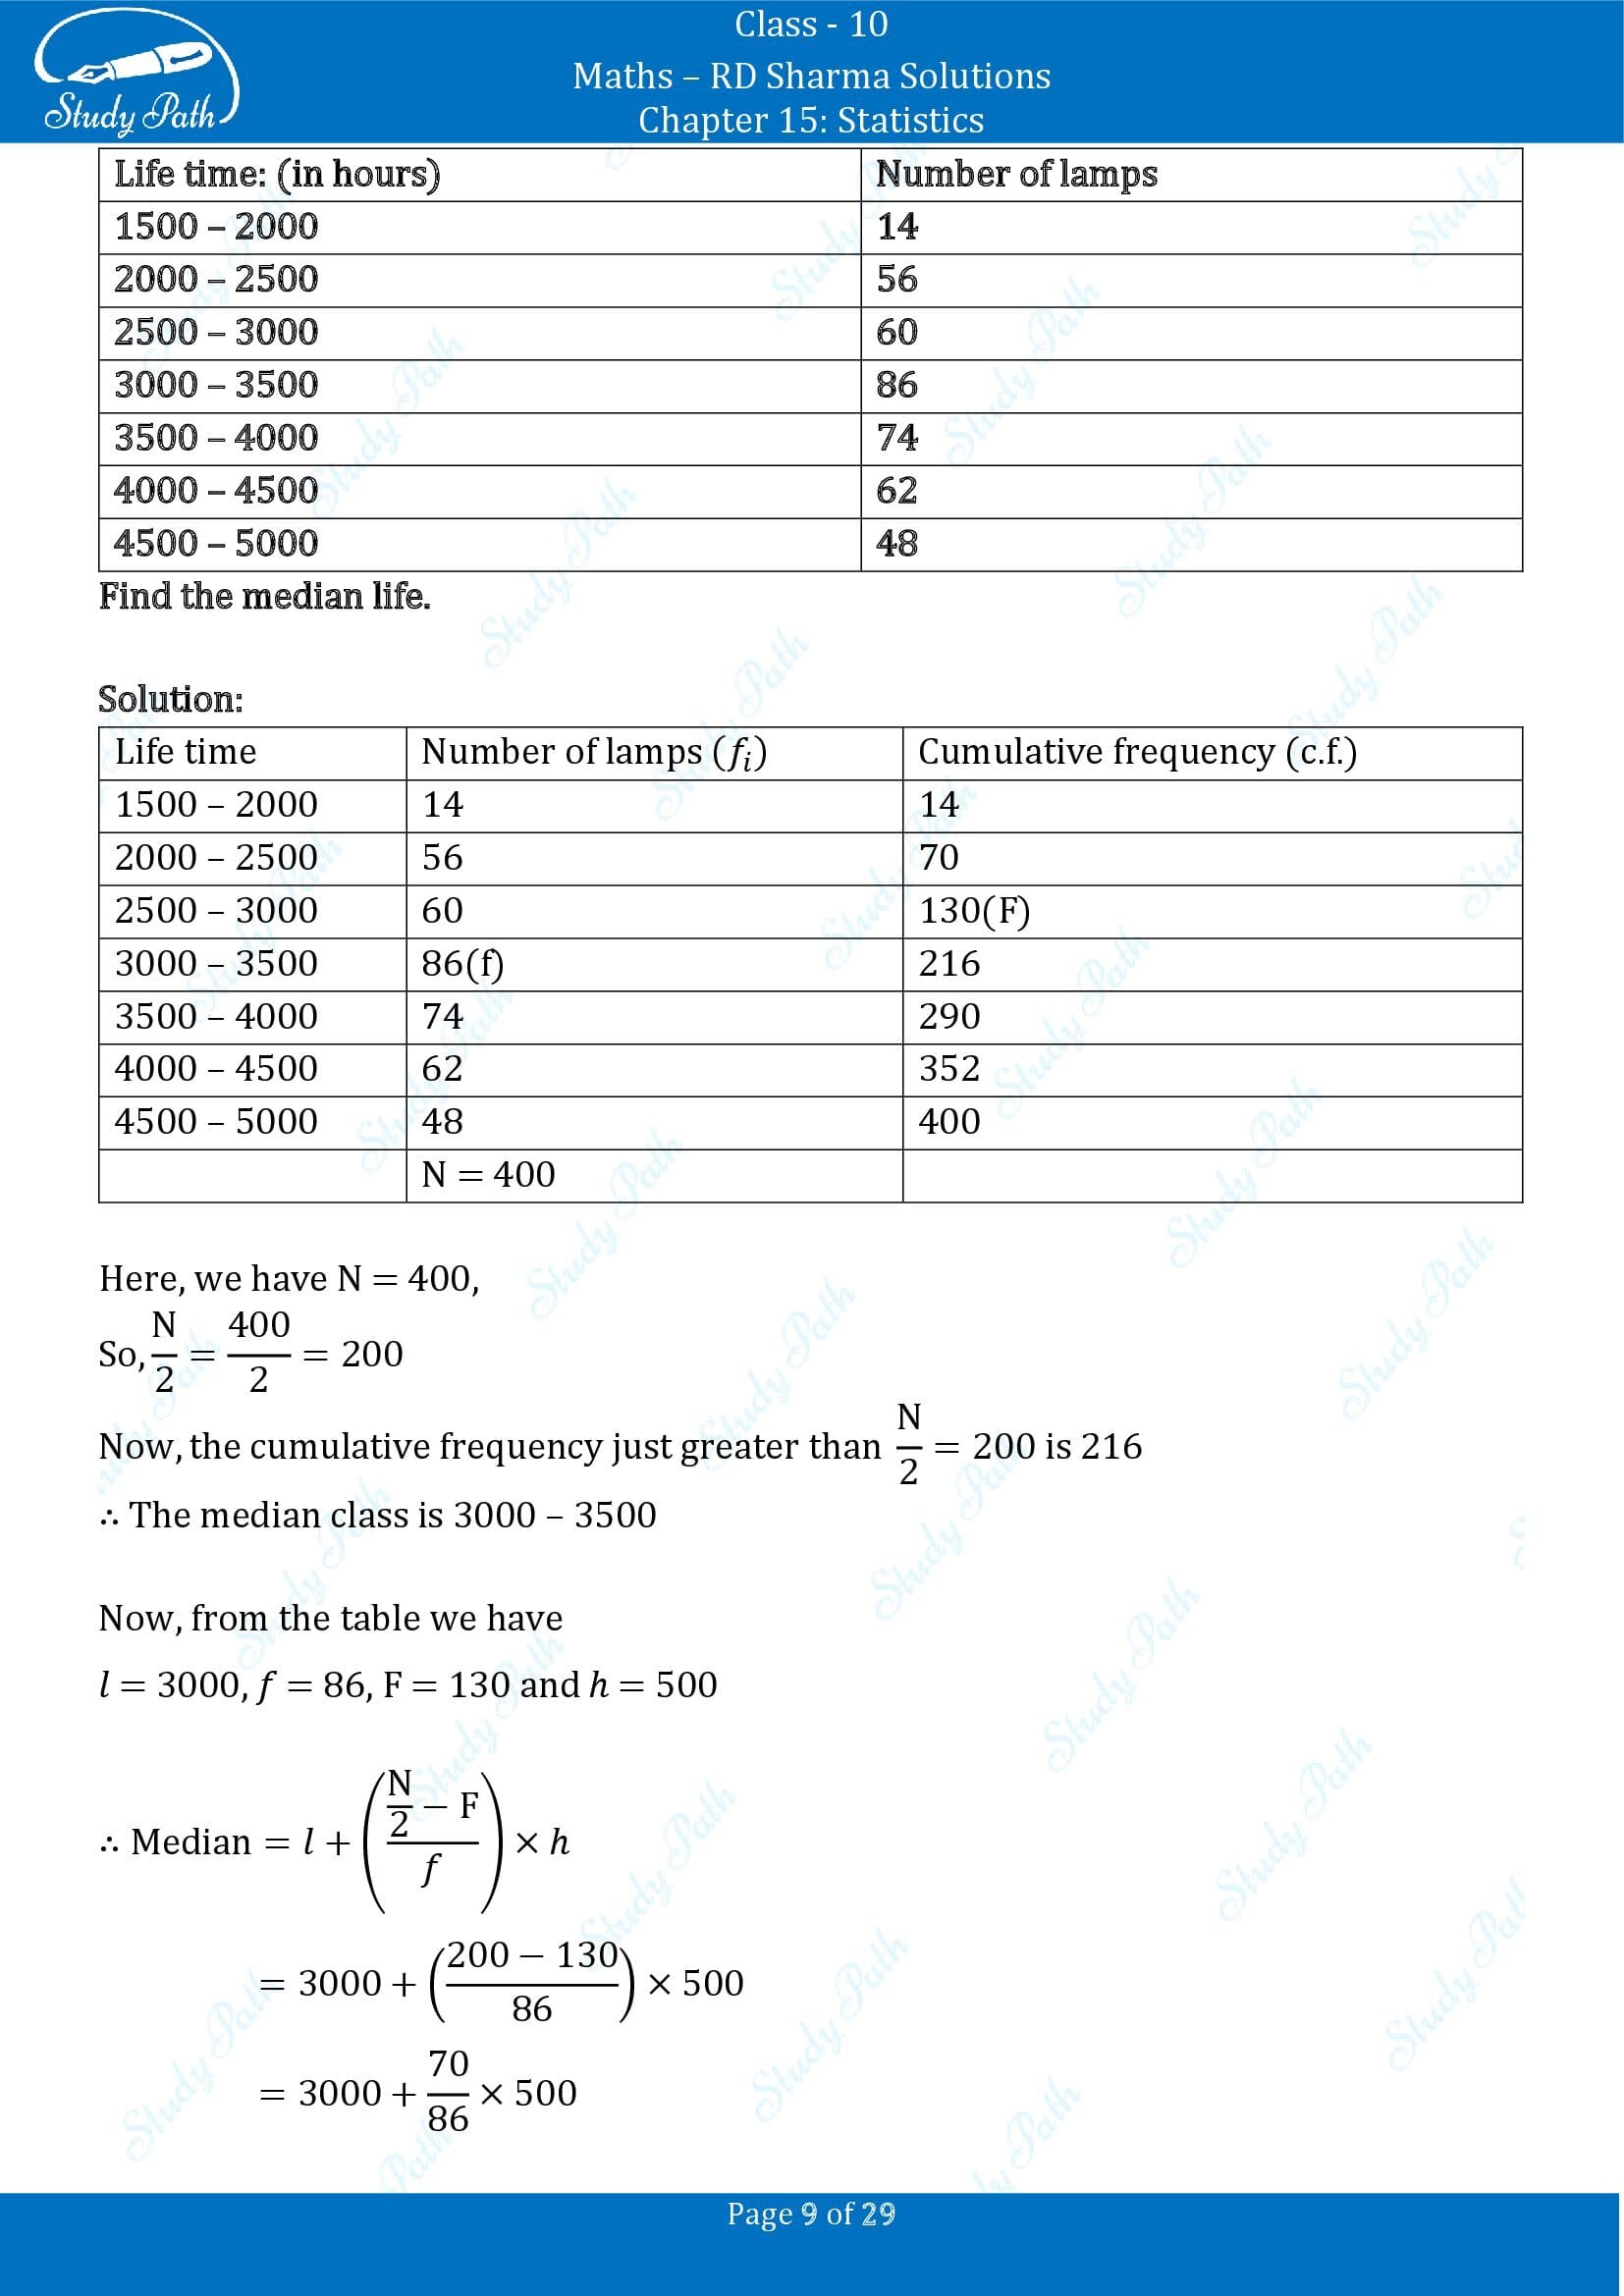 RD Sharma Solutions Class 10 Chapter 15 Statistics Exercise 15.4 00009